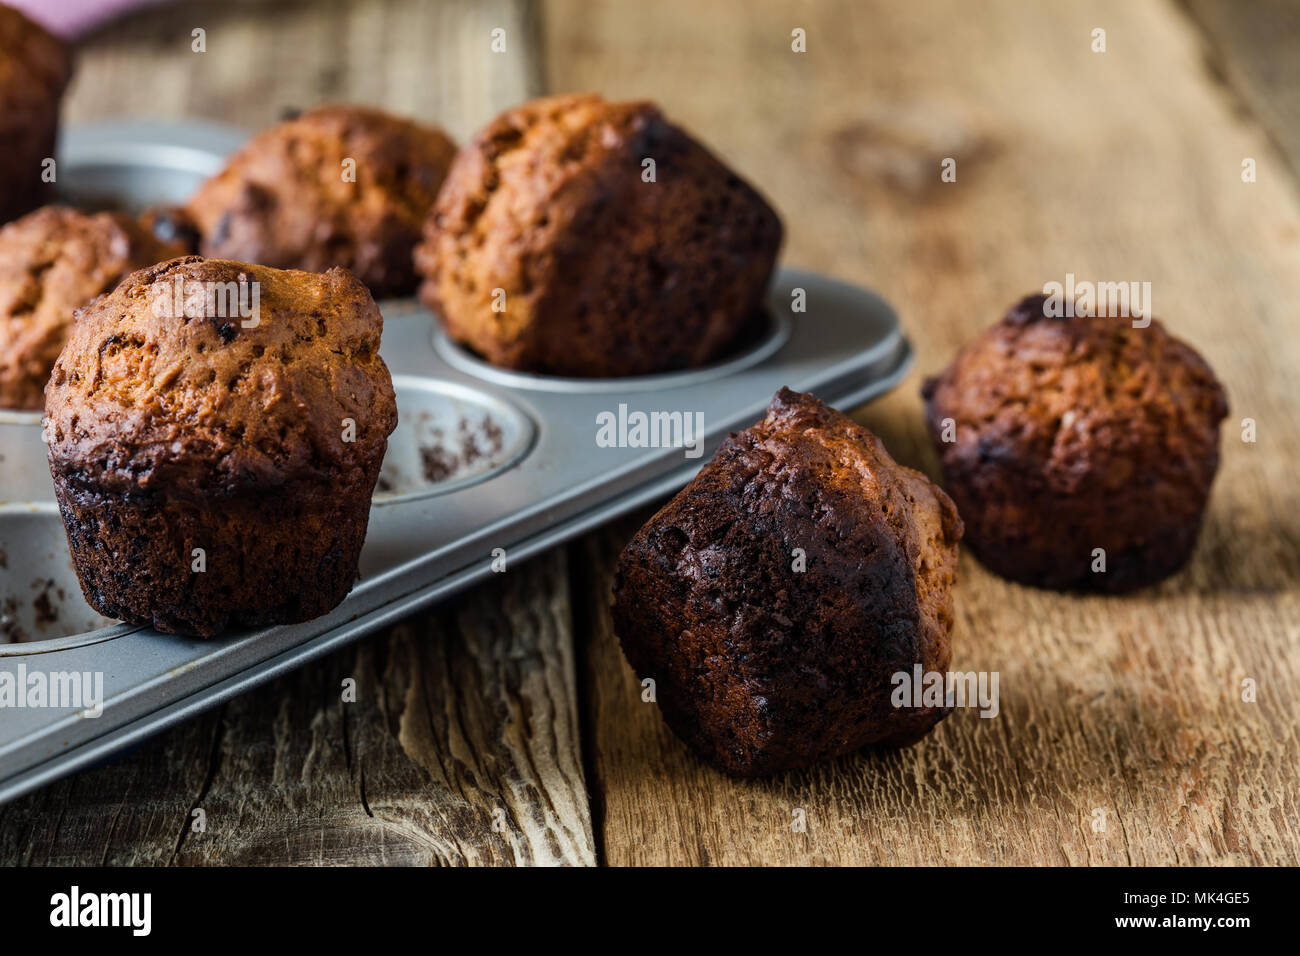 Burnt muffins in baking pan on rustic wooden table, messy kitchen situation in the kitchen Stock Photo